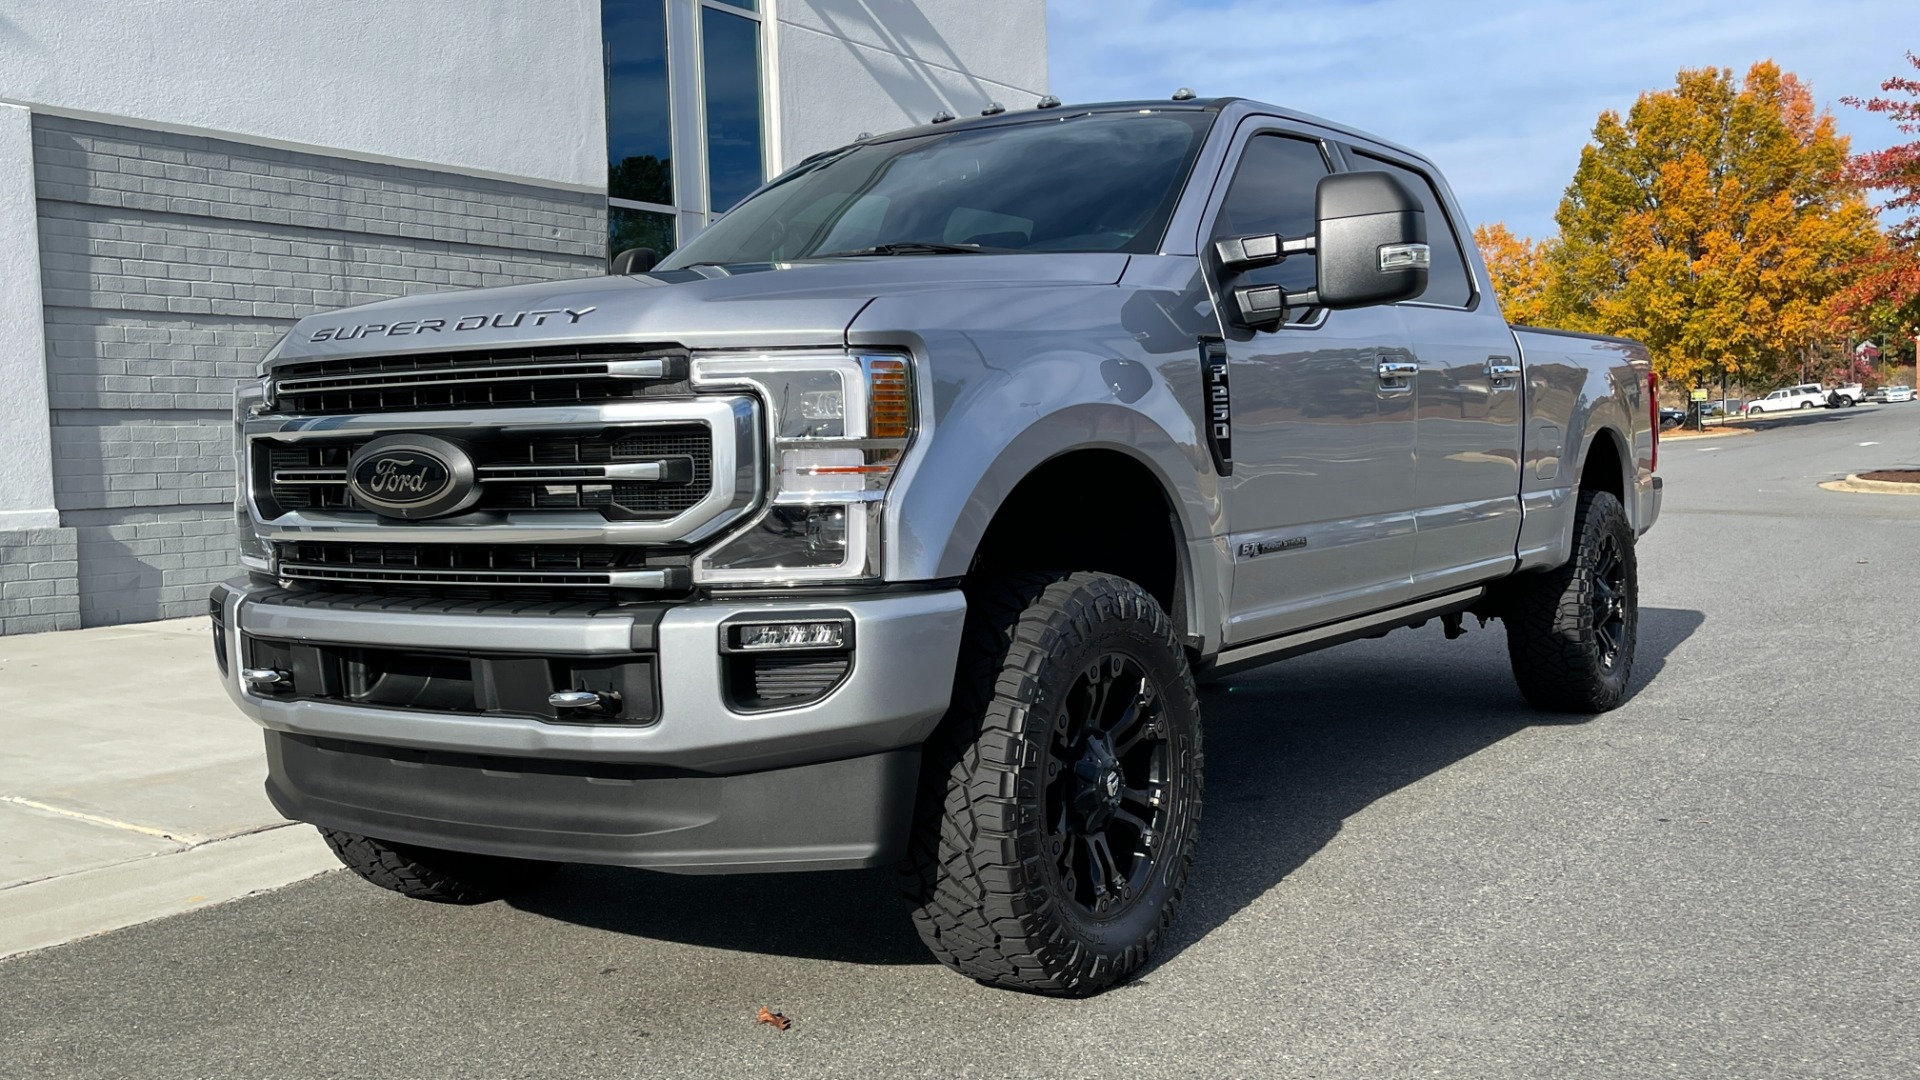 Used 2022 Ford Super Duty F-250 SRW PLATINUM / 6.7L DIESEL / PANORAMIC ROOF / BLACKOUT / FUEL WHEELS / TOW PACK for sale Sold at Formula Imports in Charlotte NC 28227 2